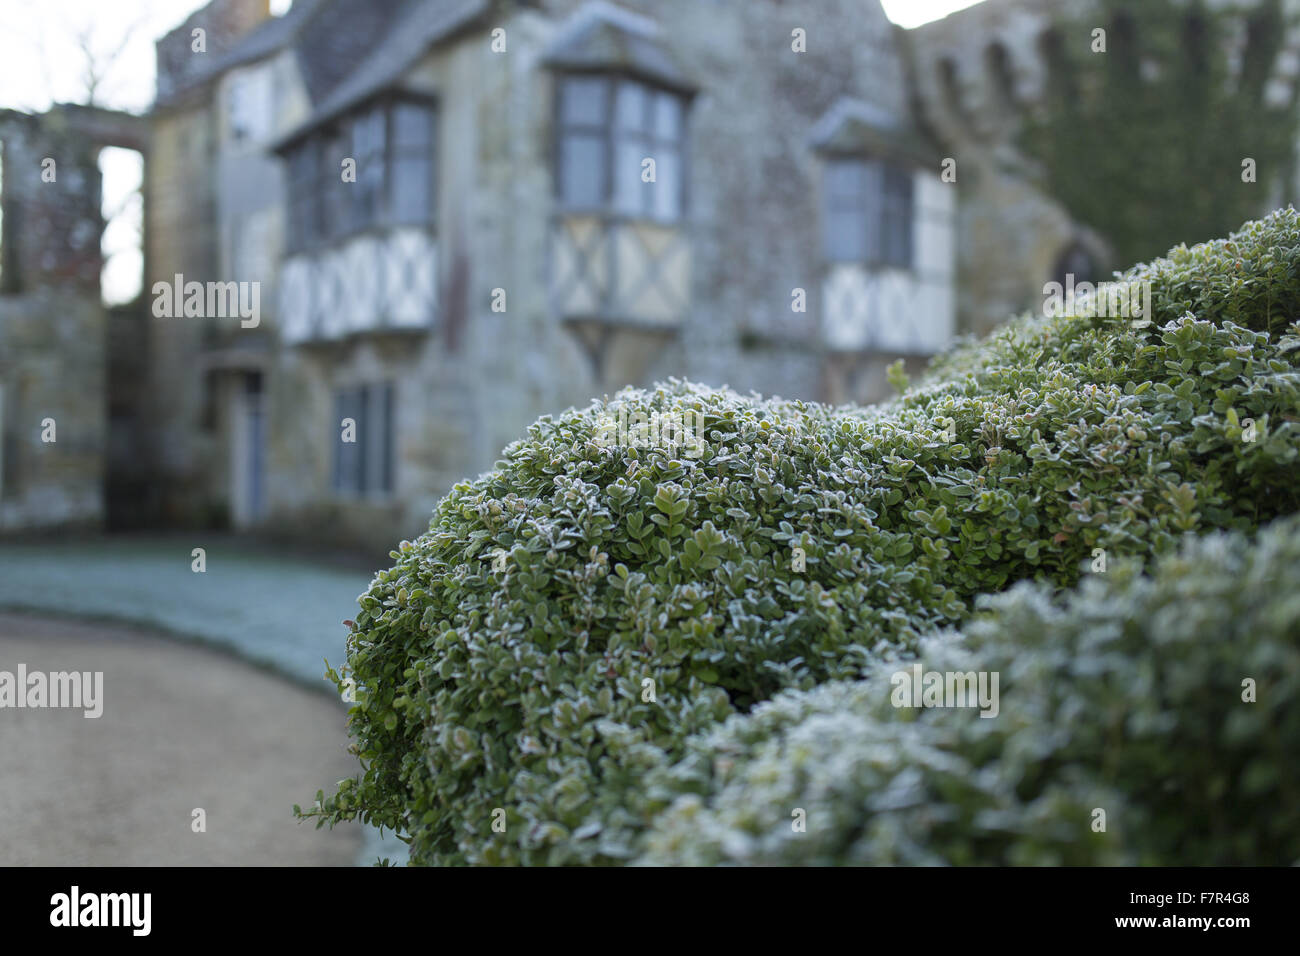 A winter's day at Scotney Castle, Kent. Scotney features a 14th century moated castle, a Victorian mansion and a romantic garden. Stock Photo